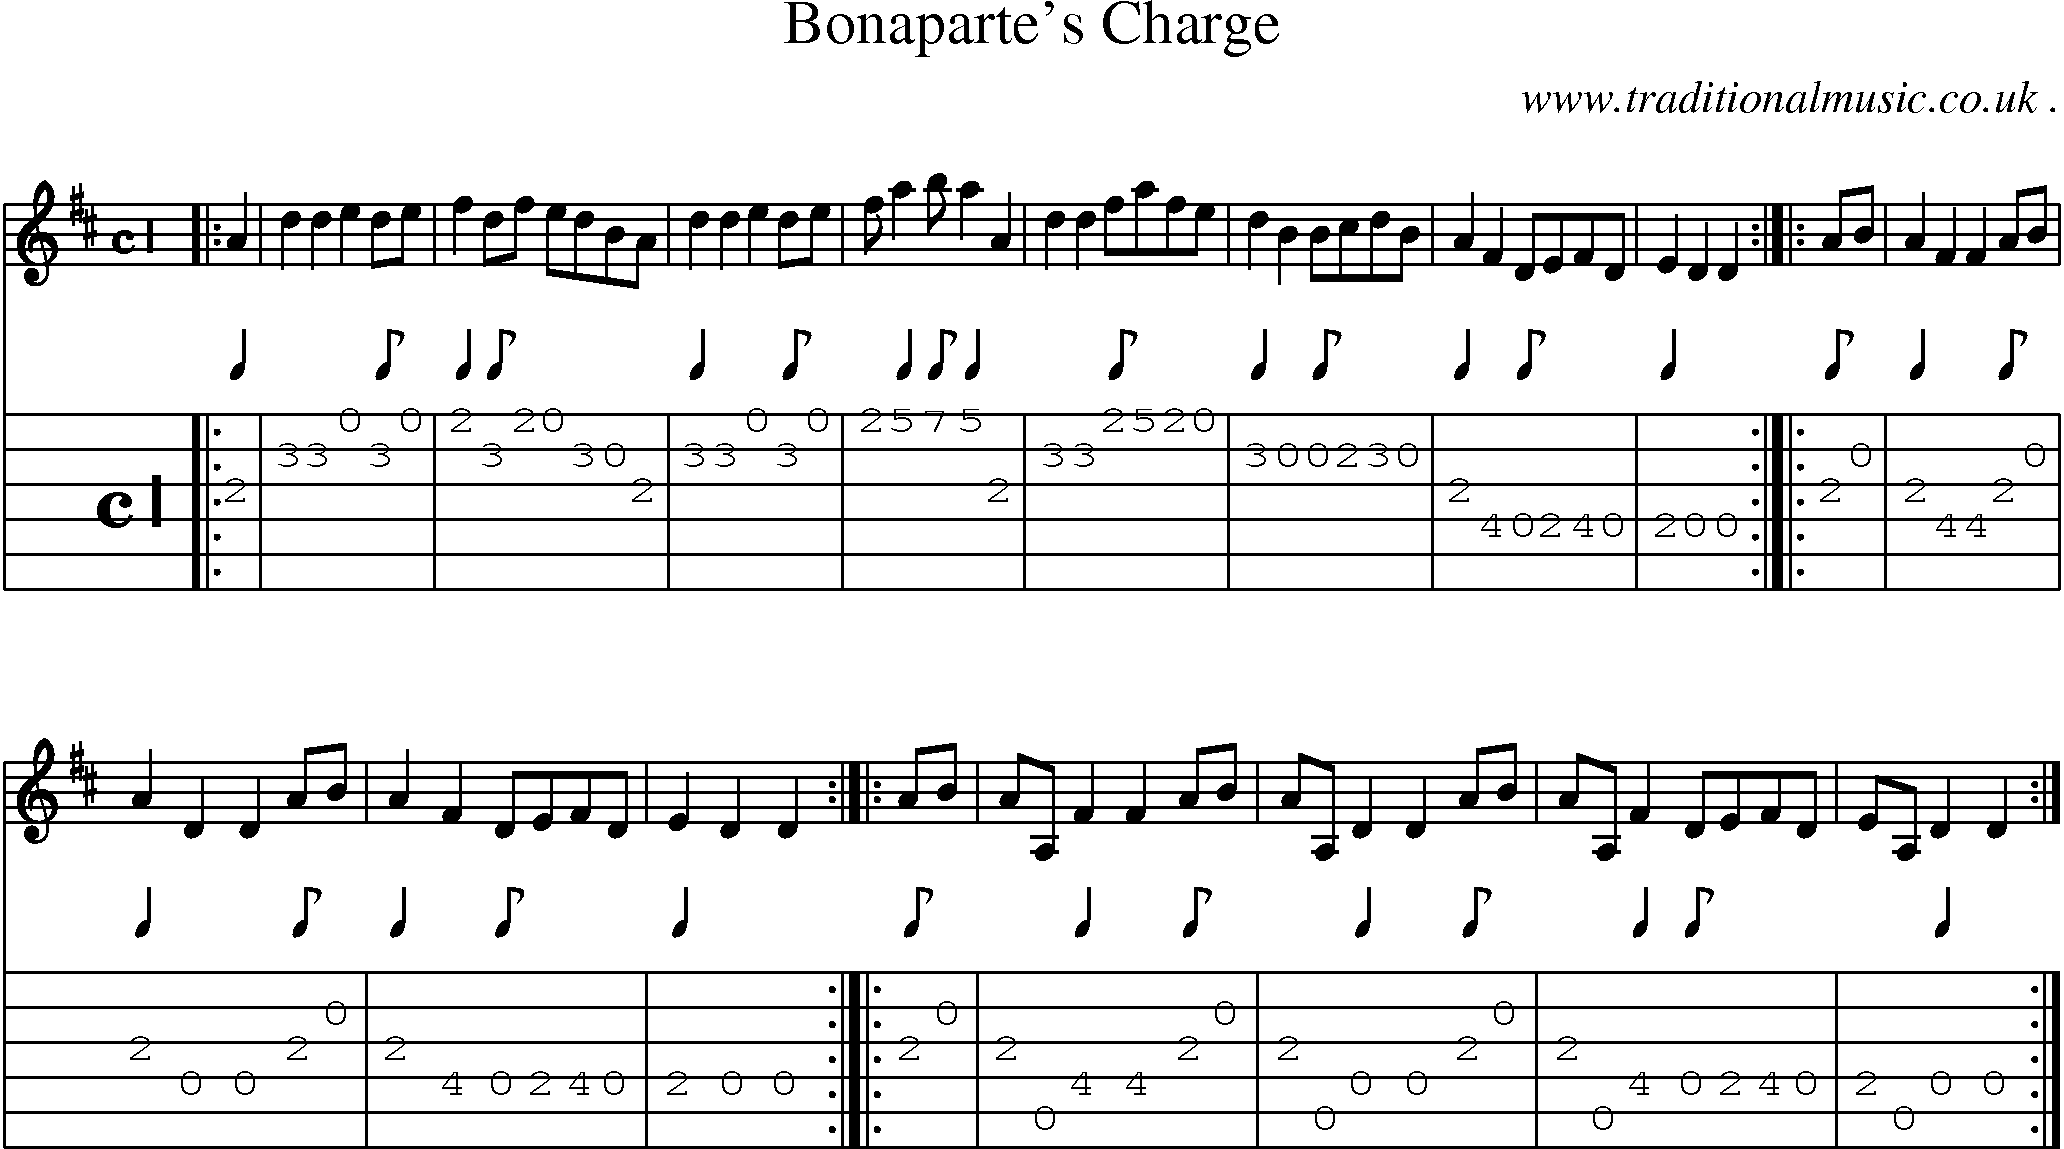 Music Score and Guitar Tabs for Bonapartes Charge